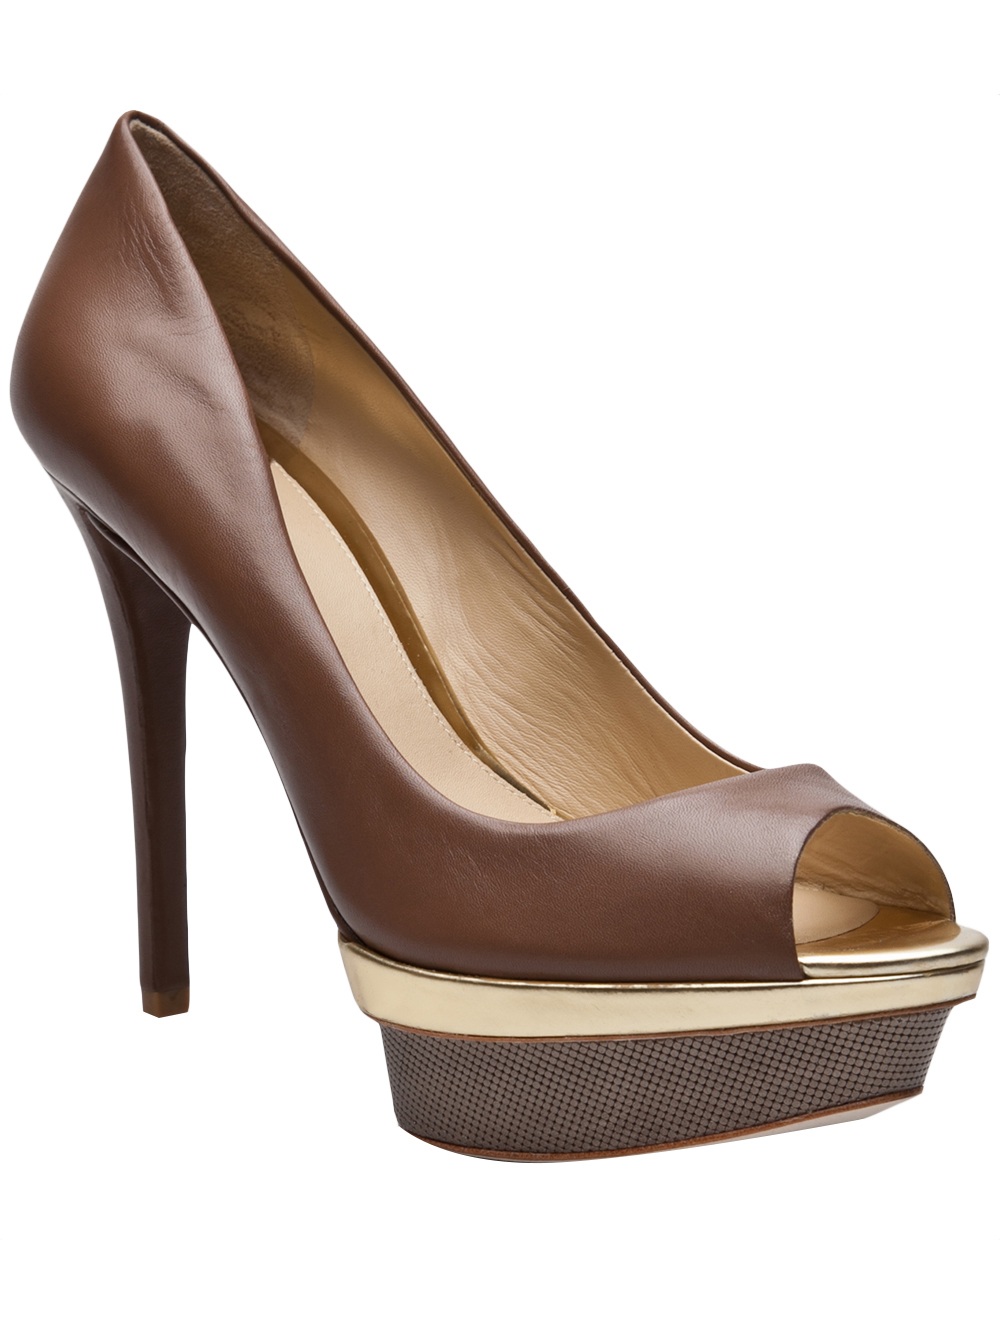 B Brian Atwood Platform Shoe in Brown (taupe) Lyst